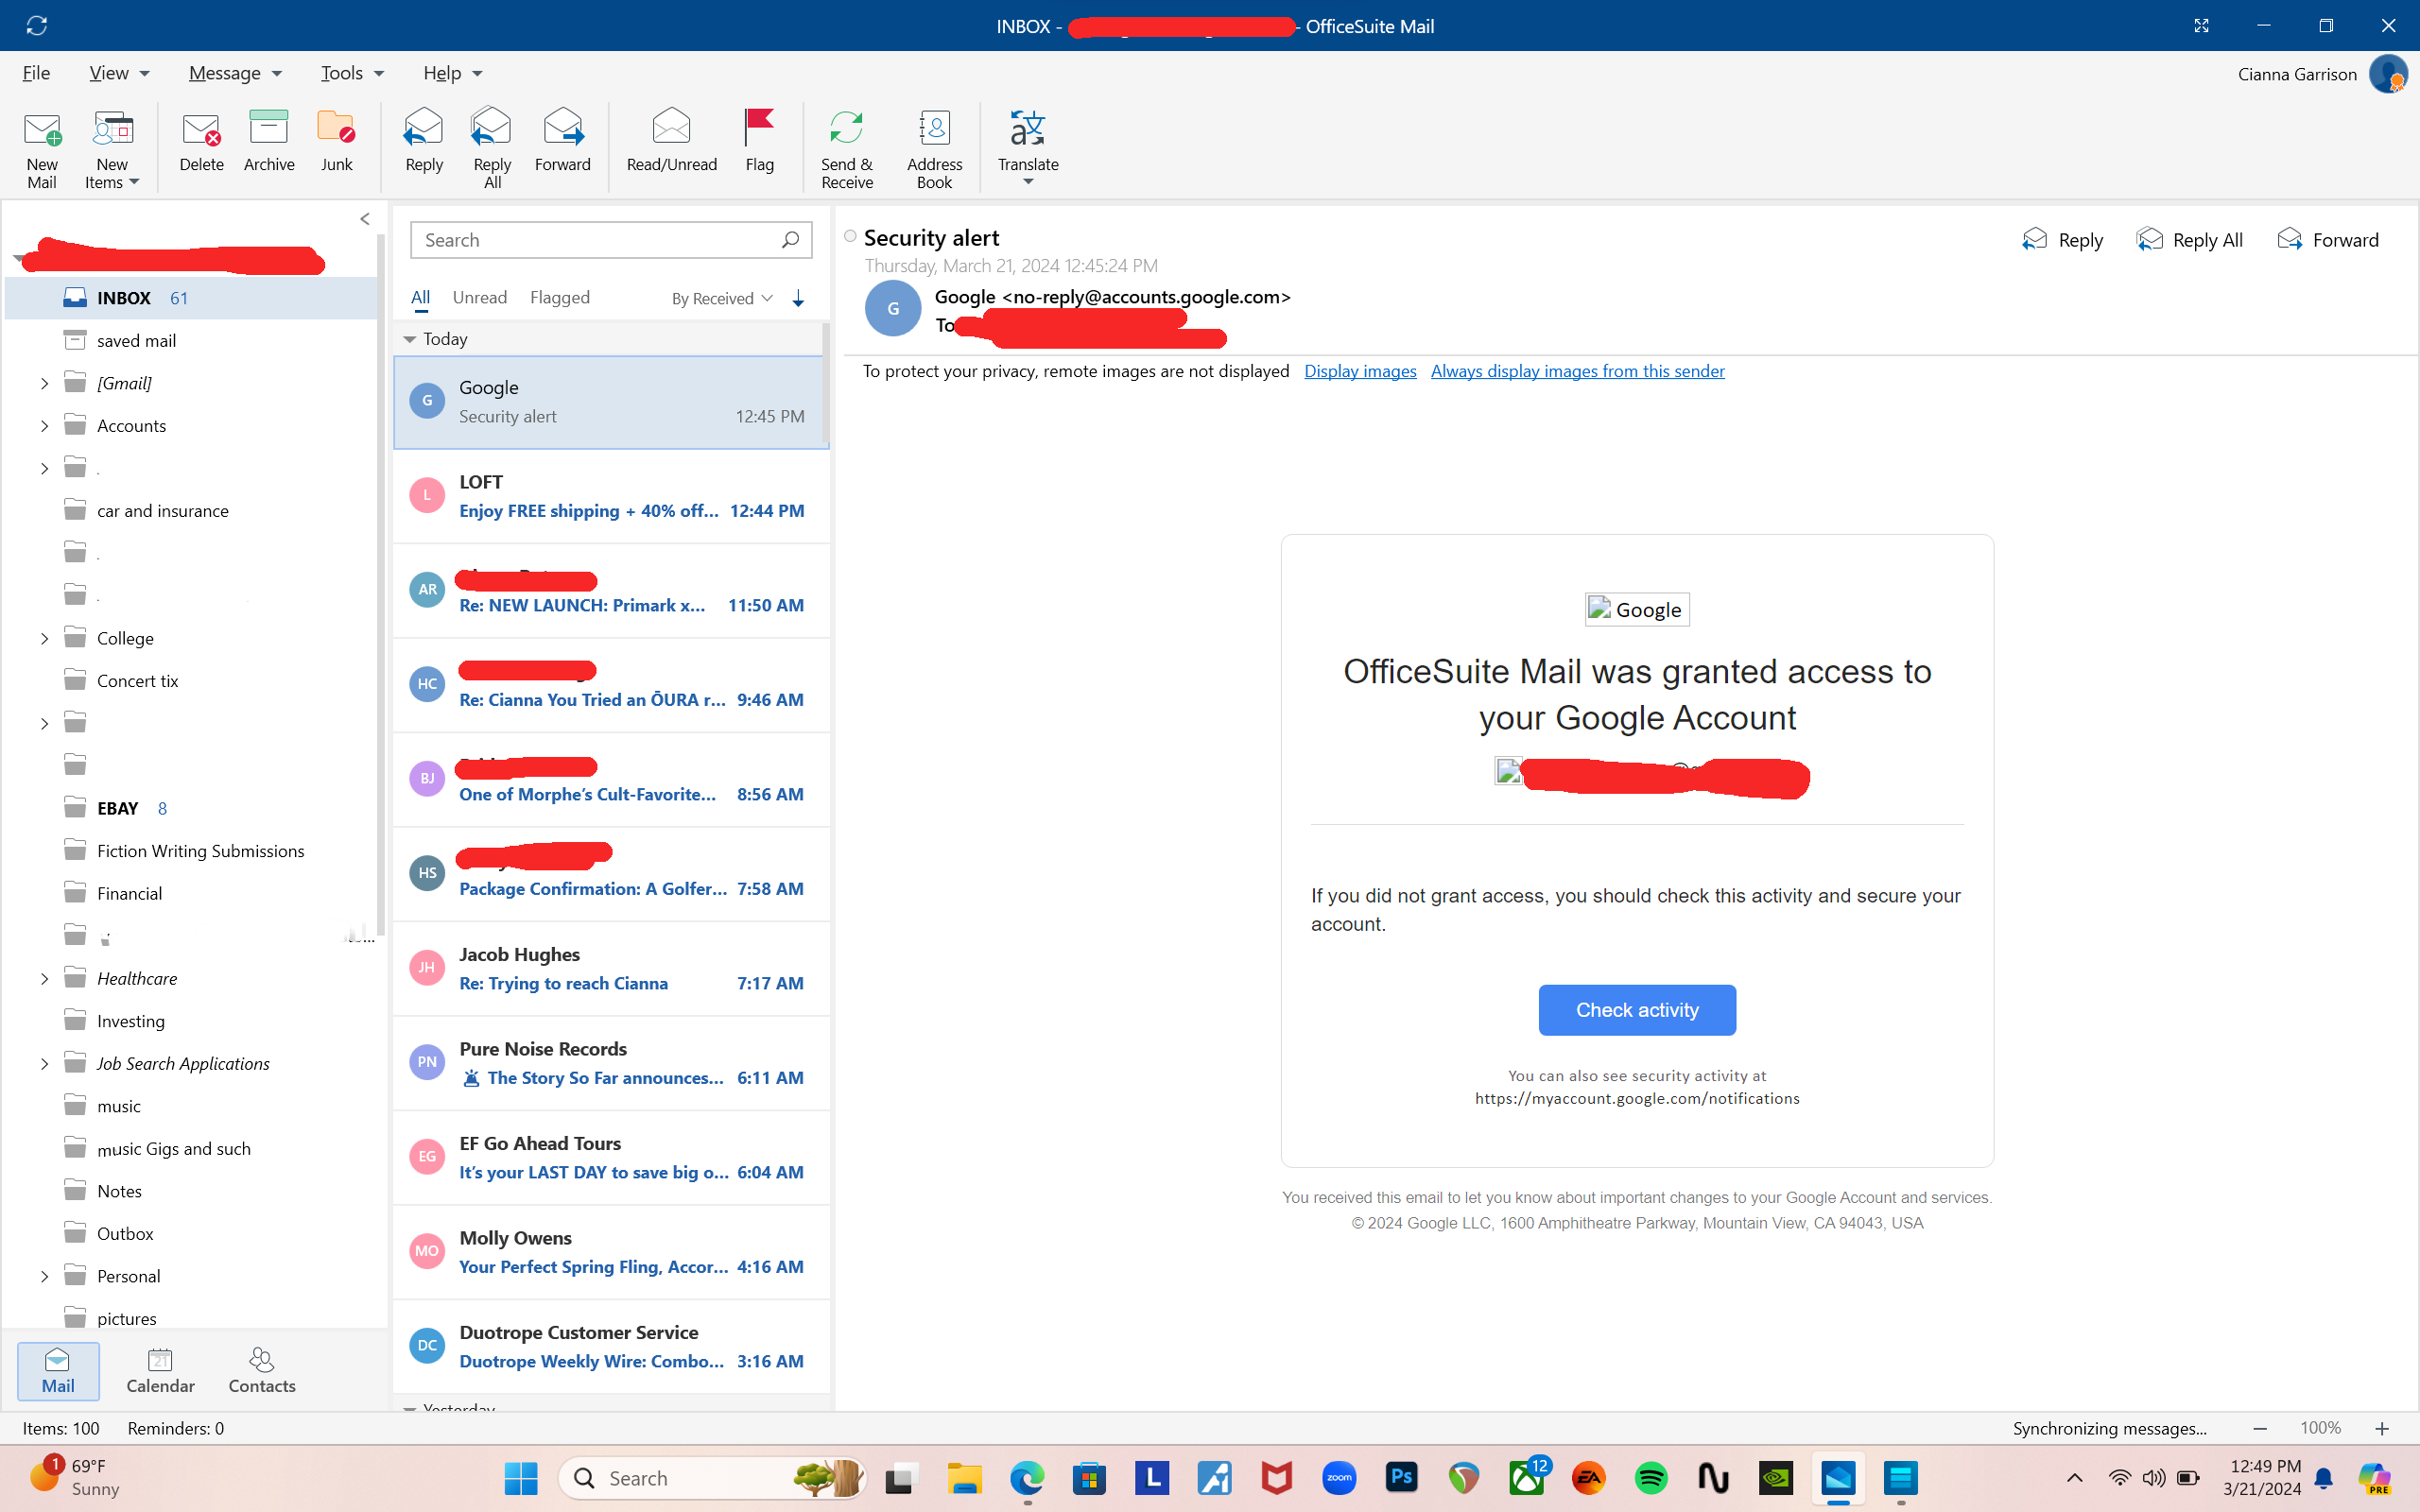 A screenshot of an email inbox using OfficeSuite's Mail app.